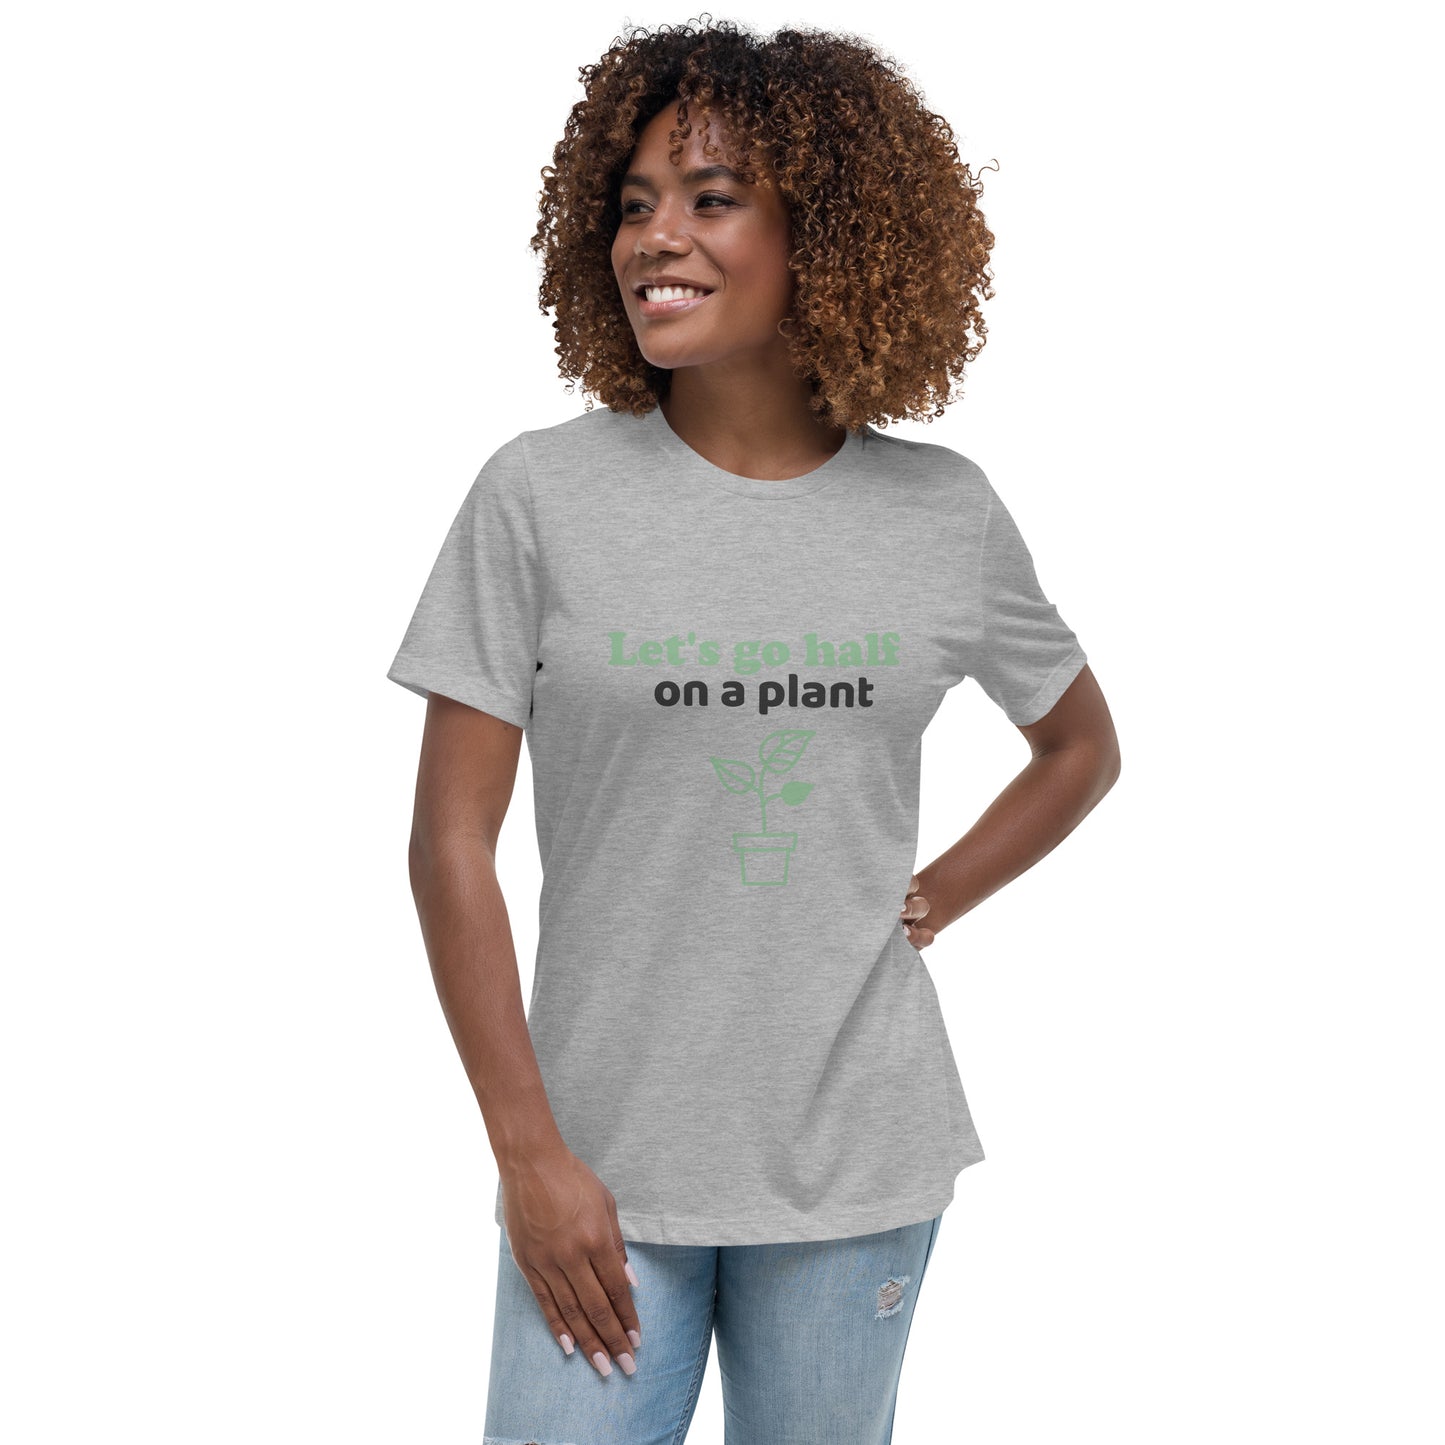 Let's Go Half On A Plant Women's Relaxed T-Shirt